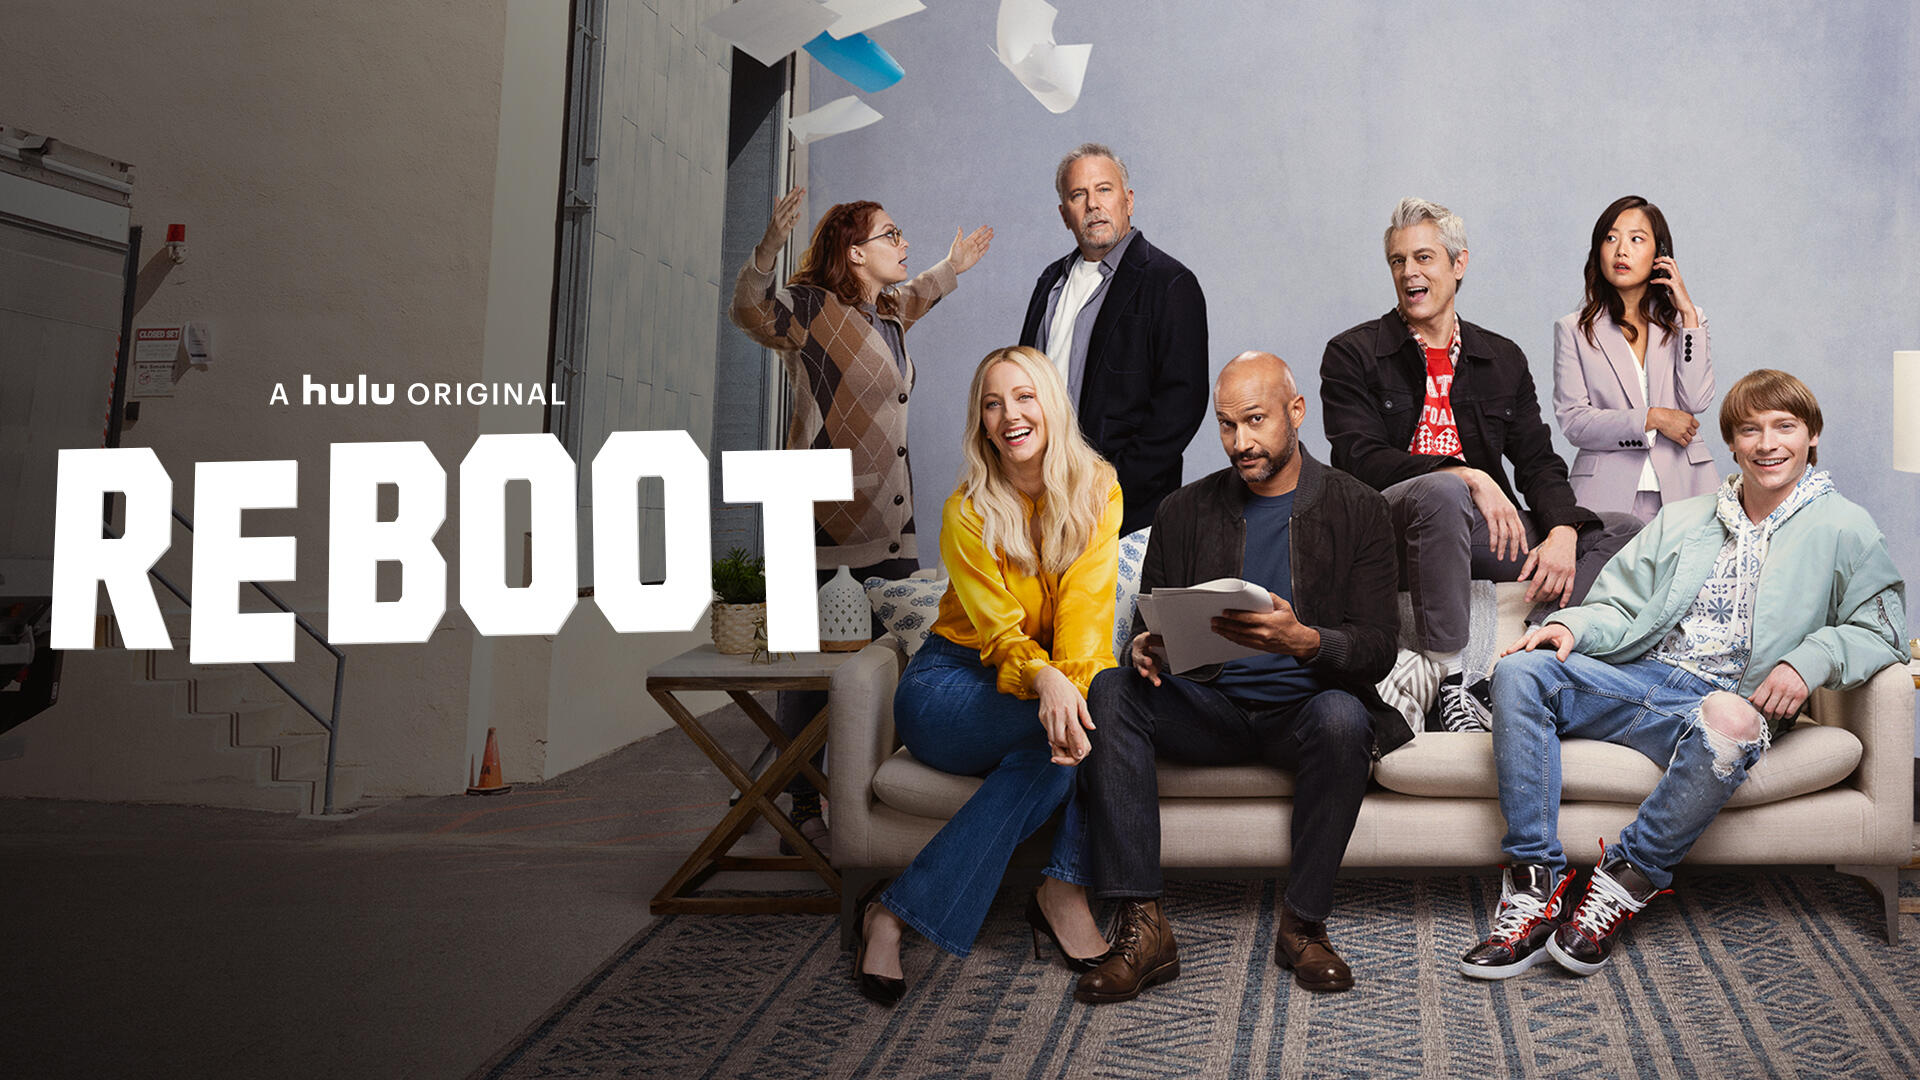 Reboot -- Season 1 -- Hulu reboots an early 2000’s family sitcom, forcing its dysfunctional cast back together. Now they must deal with their unresolved issues in today’s fast-changing world. Reed (Keegan-Michael Key), Clay (Johnny Knoxville), Bree (Judy Greer), Gordon (Paul Reiser), Hannah (Rachel Bloom), Zach (Calum Worthy) and Elaine (Krista Marie Yu), shown. (Courtesy of Hulu)